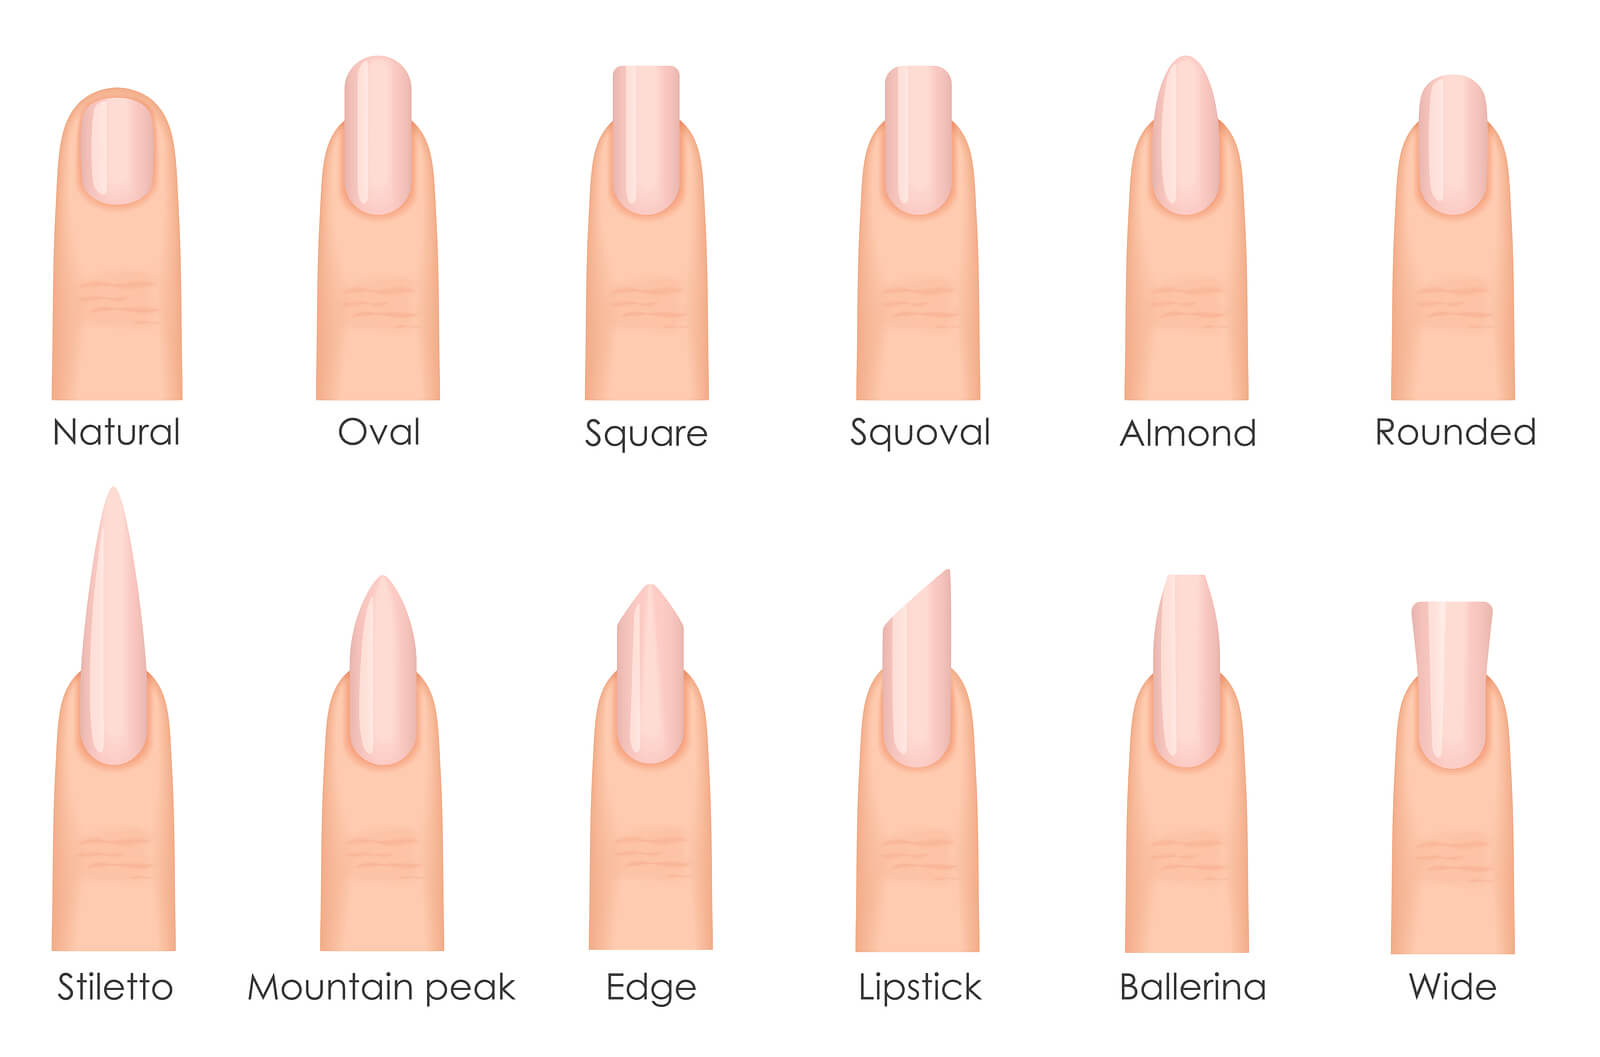 1. "Nude shades for a slimming effect on fingers" - wide 10